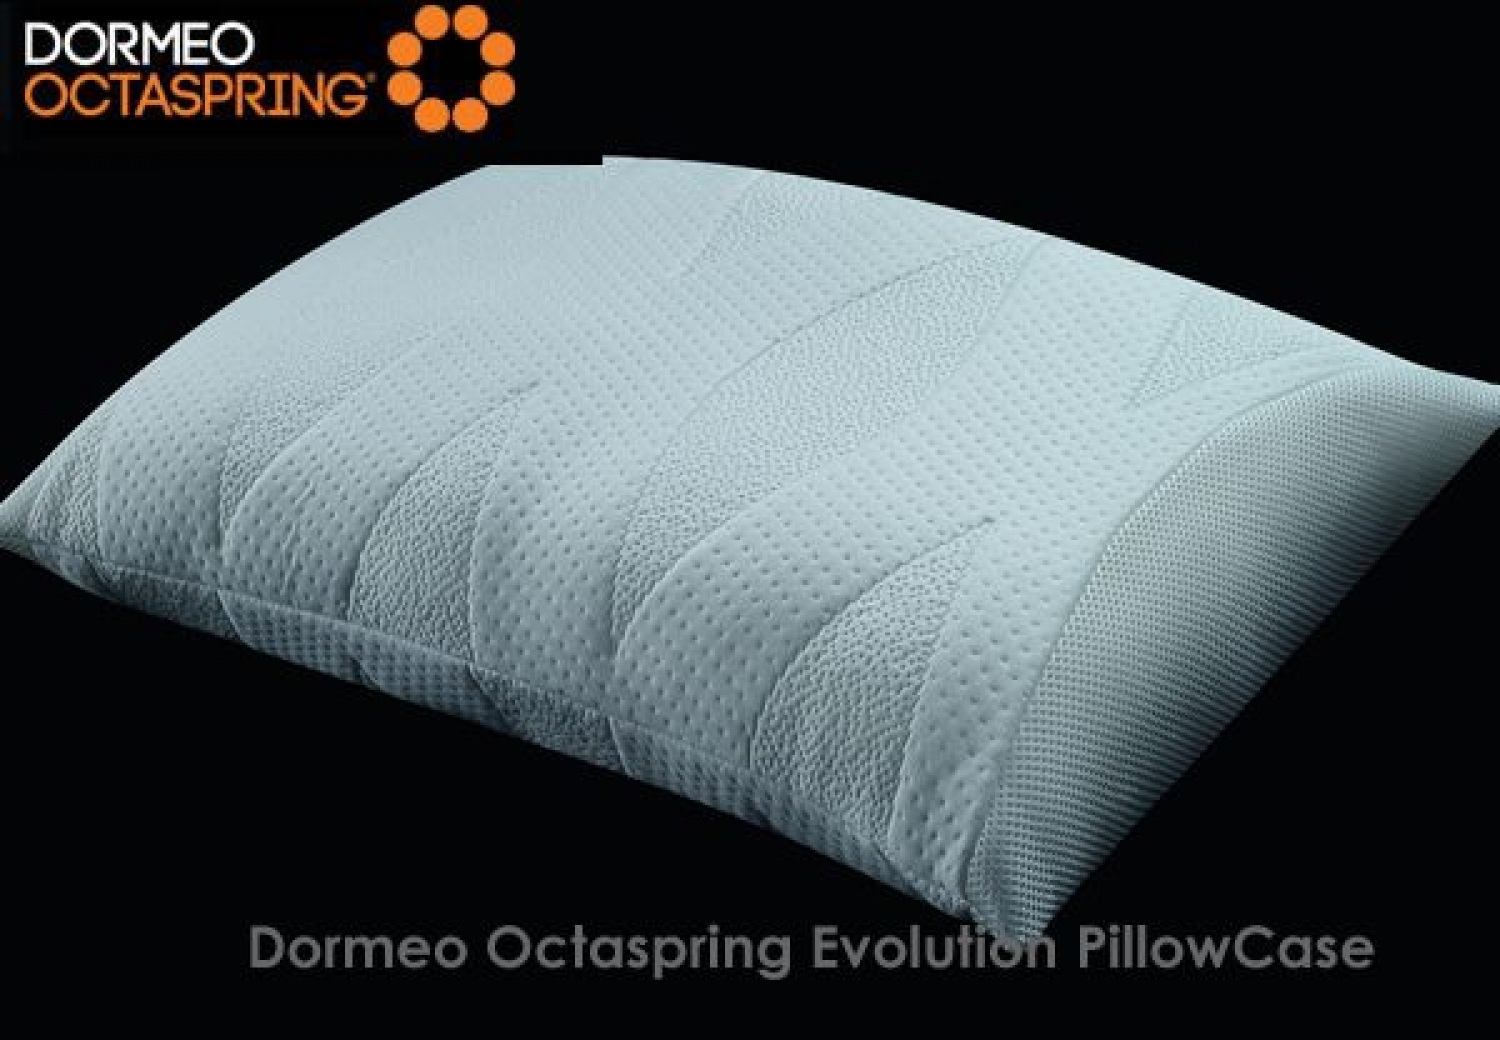 Dormeo Octaspring Evolution Pillow, Beds and Mattresses Los Alqueros, absolute beds, warehouse in san pedro de alcantara, The Bed Warehouse and outlet.  image